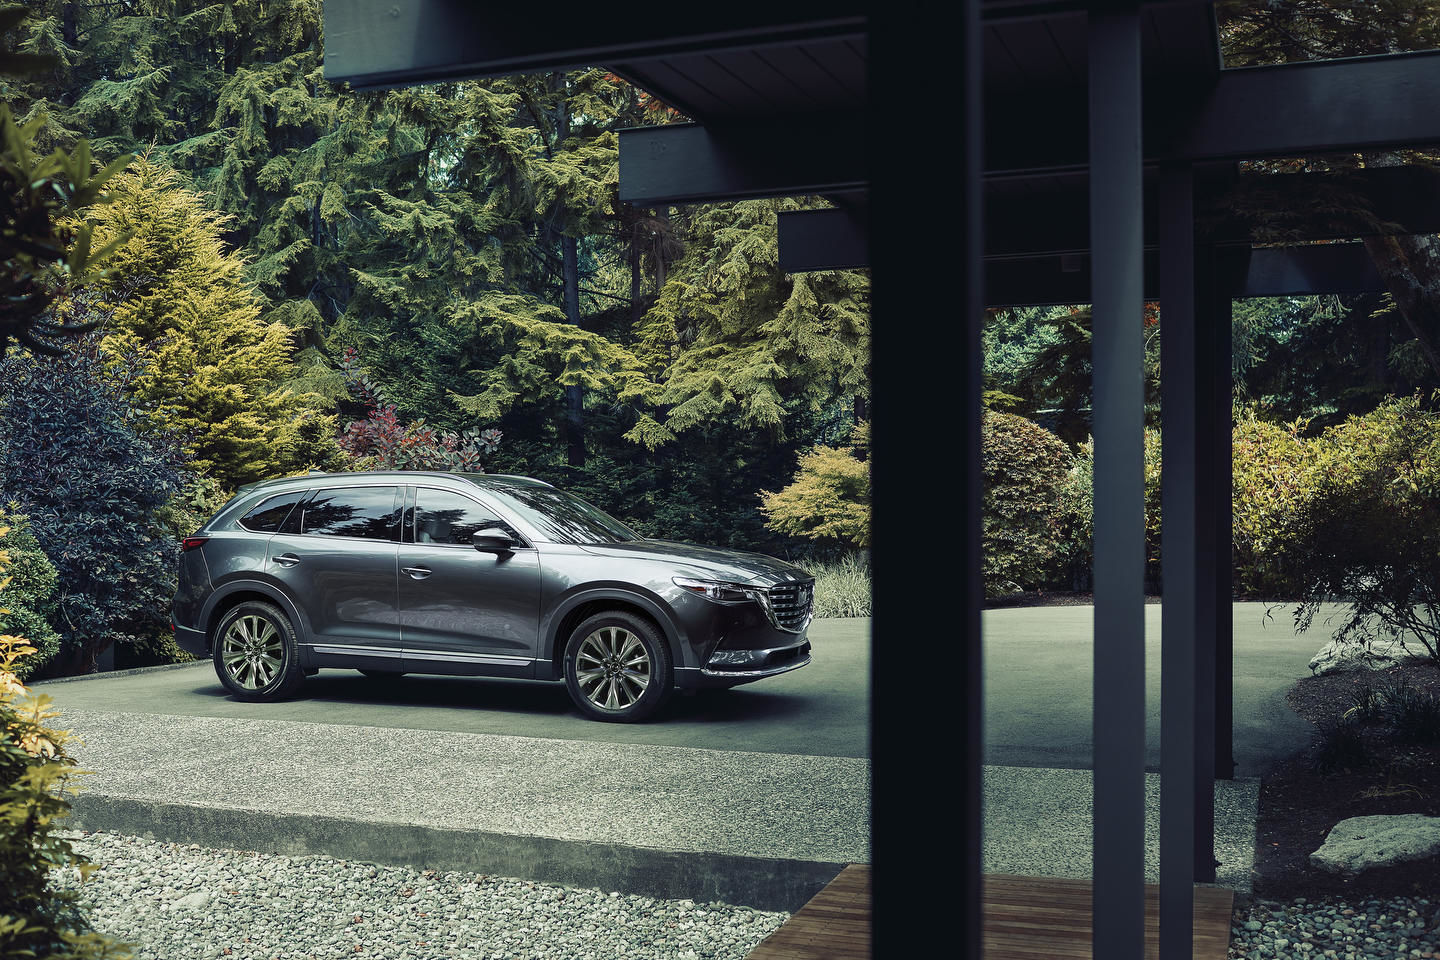 2022 Mazda CX-9 one of the best small SUVs for you and your family